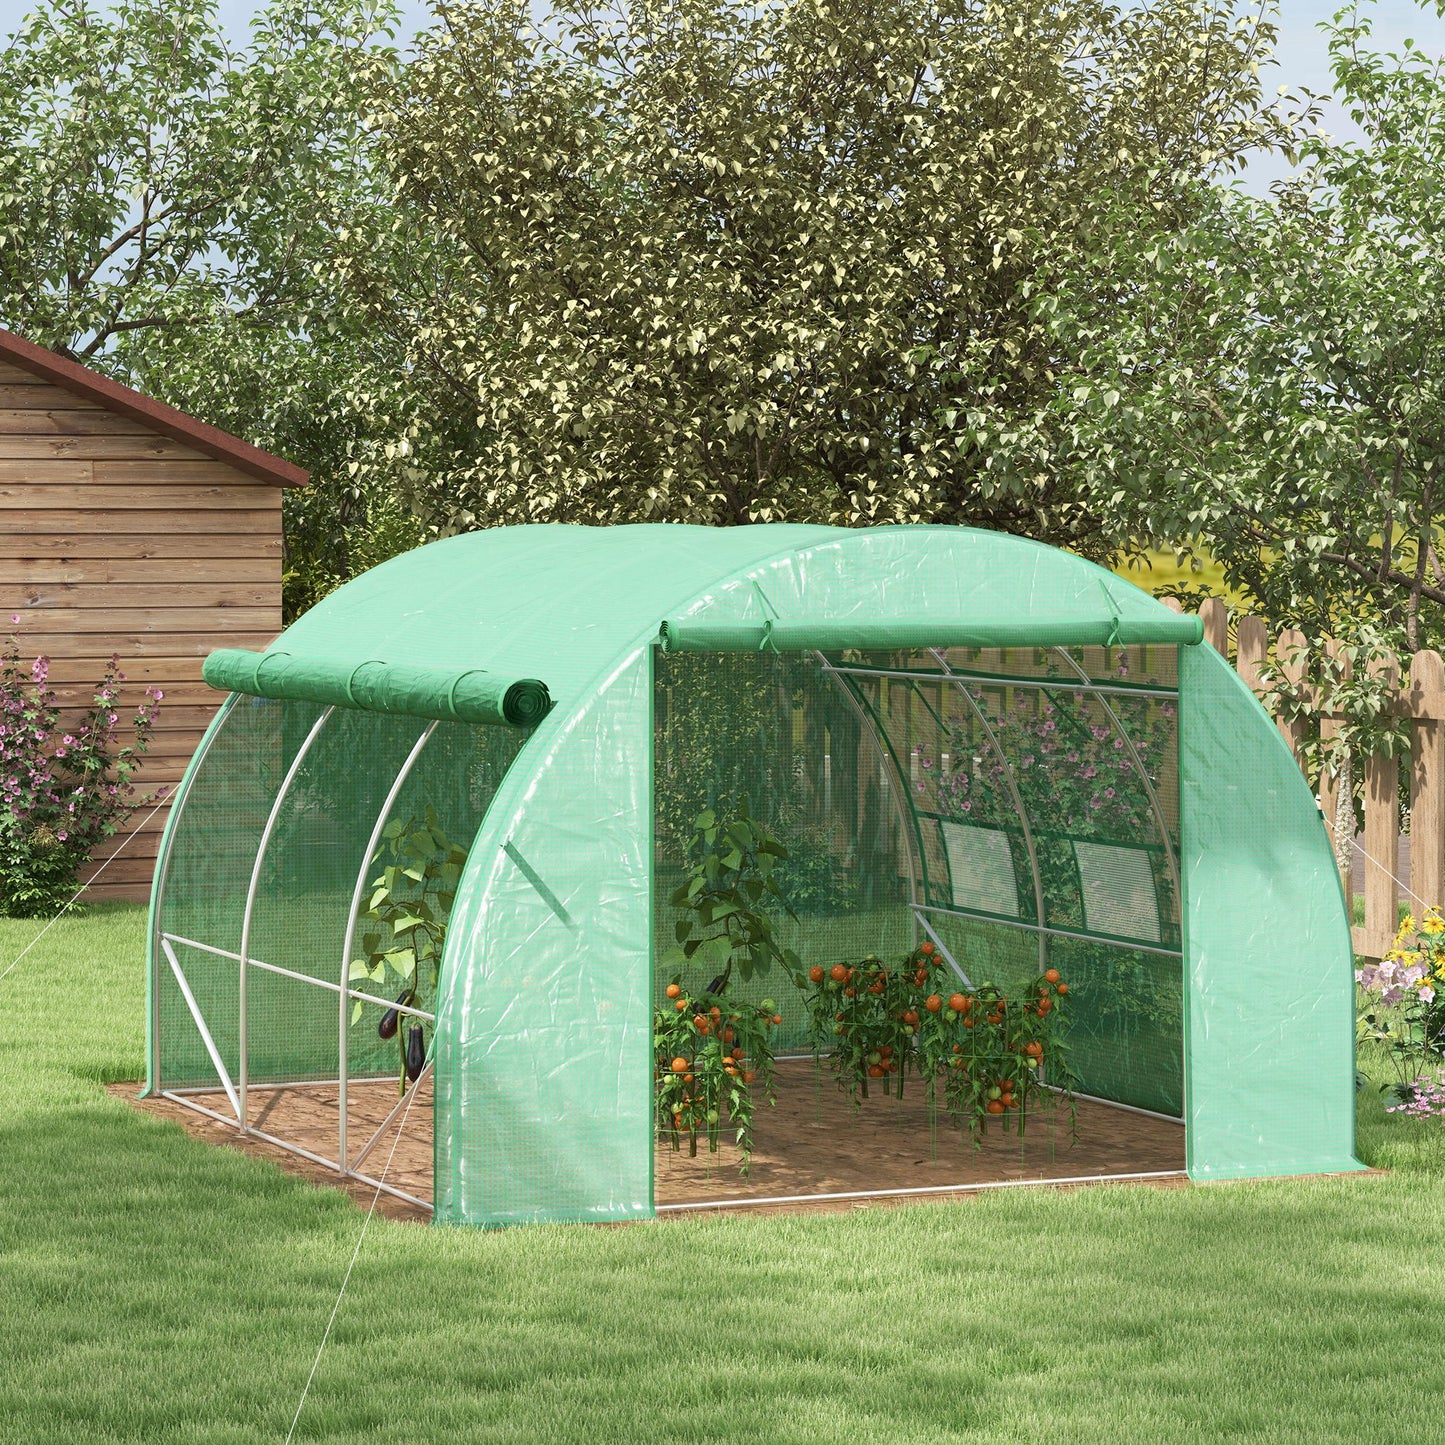 Outsunny Walk-in Polytunnel Greenhouse: With Roll-up Sidewalls, Zipped Door & 6 Ventilation Windows for Plant Growth, 3x3x2m, Green